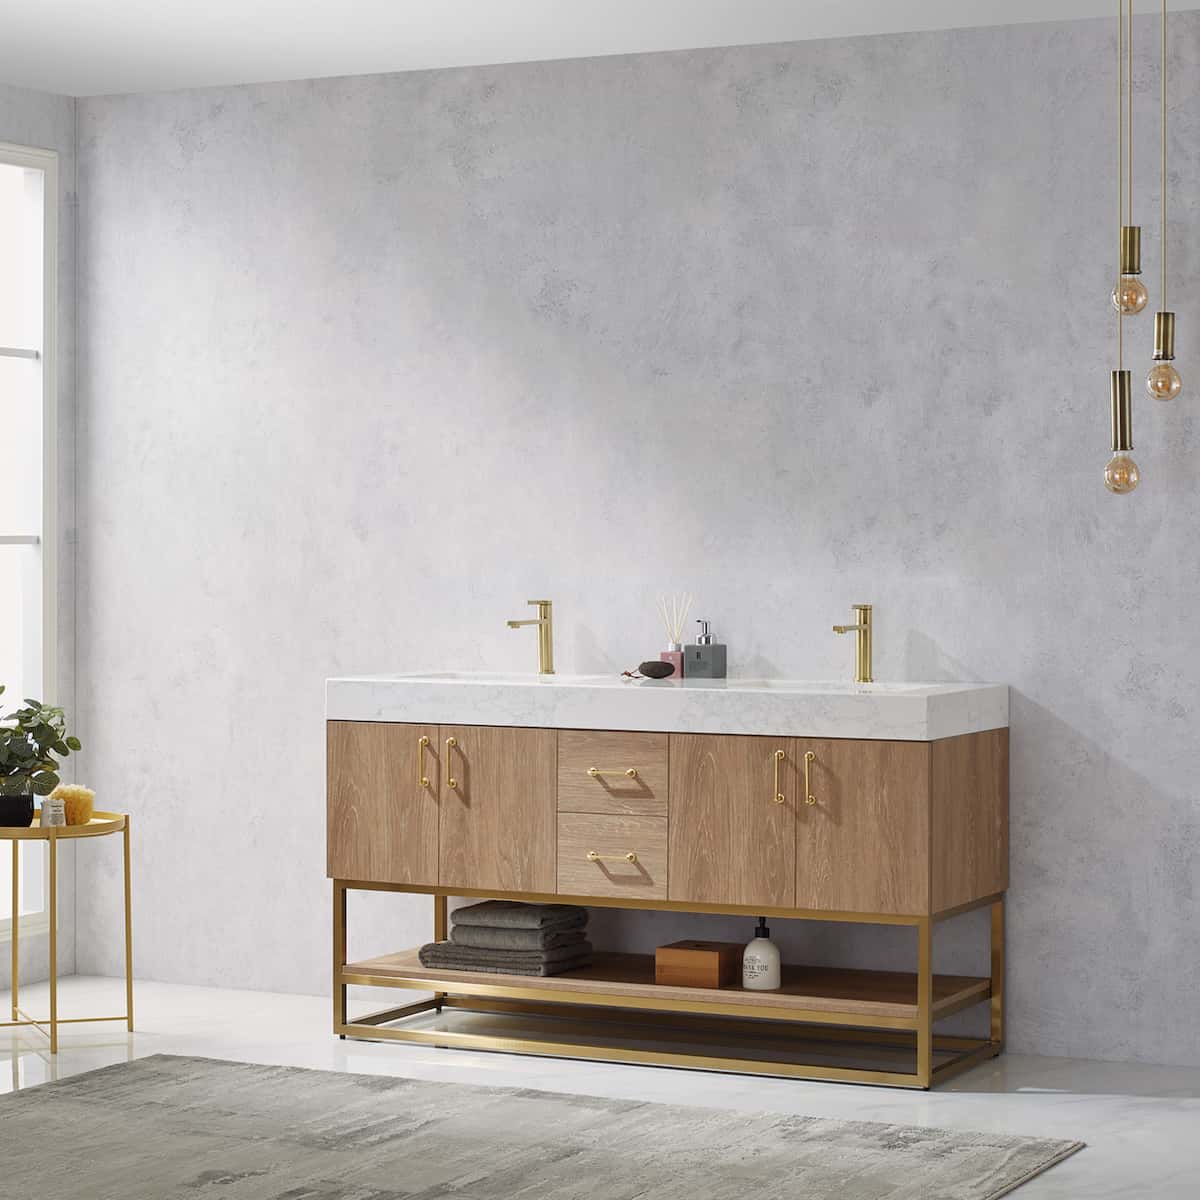 Vinnova Alistair 60 Inch Freestanding Double Vanity in North American Oak and Brushed Gold Frame with White Grain Stone Countertop Without Mirror Side 789060-NO-GW-NM